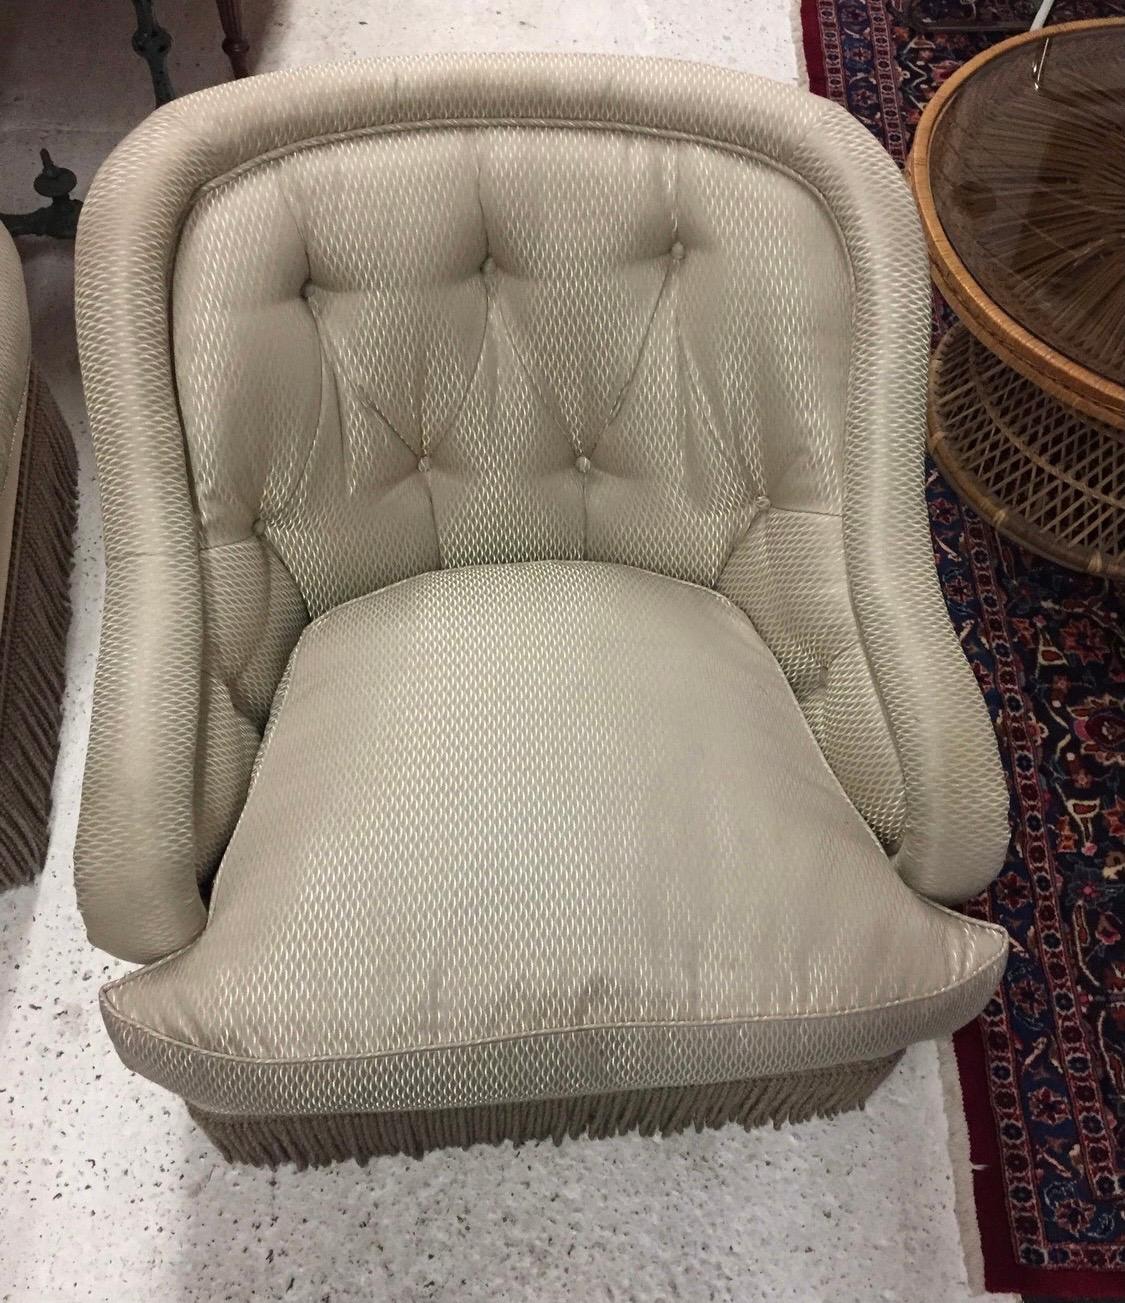 Lovely pair of silver and taupe club chairs with tufted seat backs and down wrapped cushions. The chairs are accented with a fabulous rope fringe trim. They sit very comfortably and have age appropriate wear.